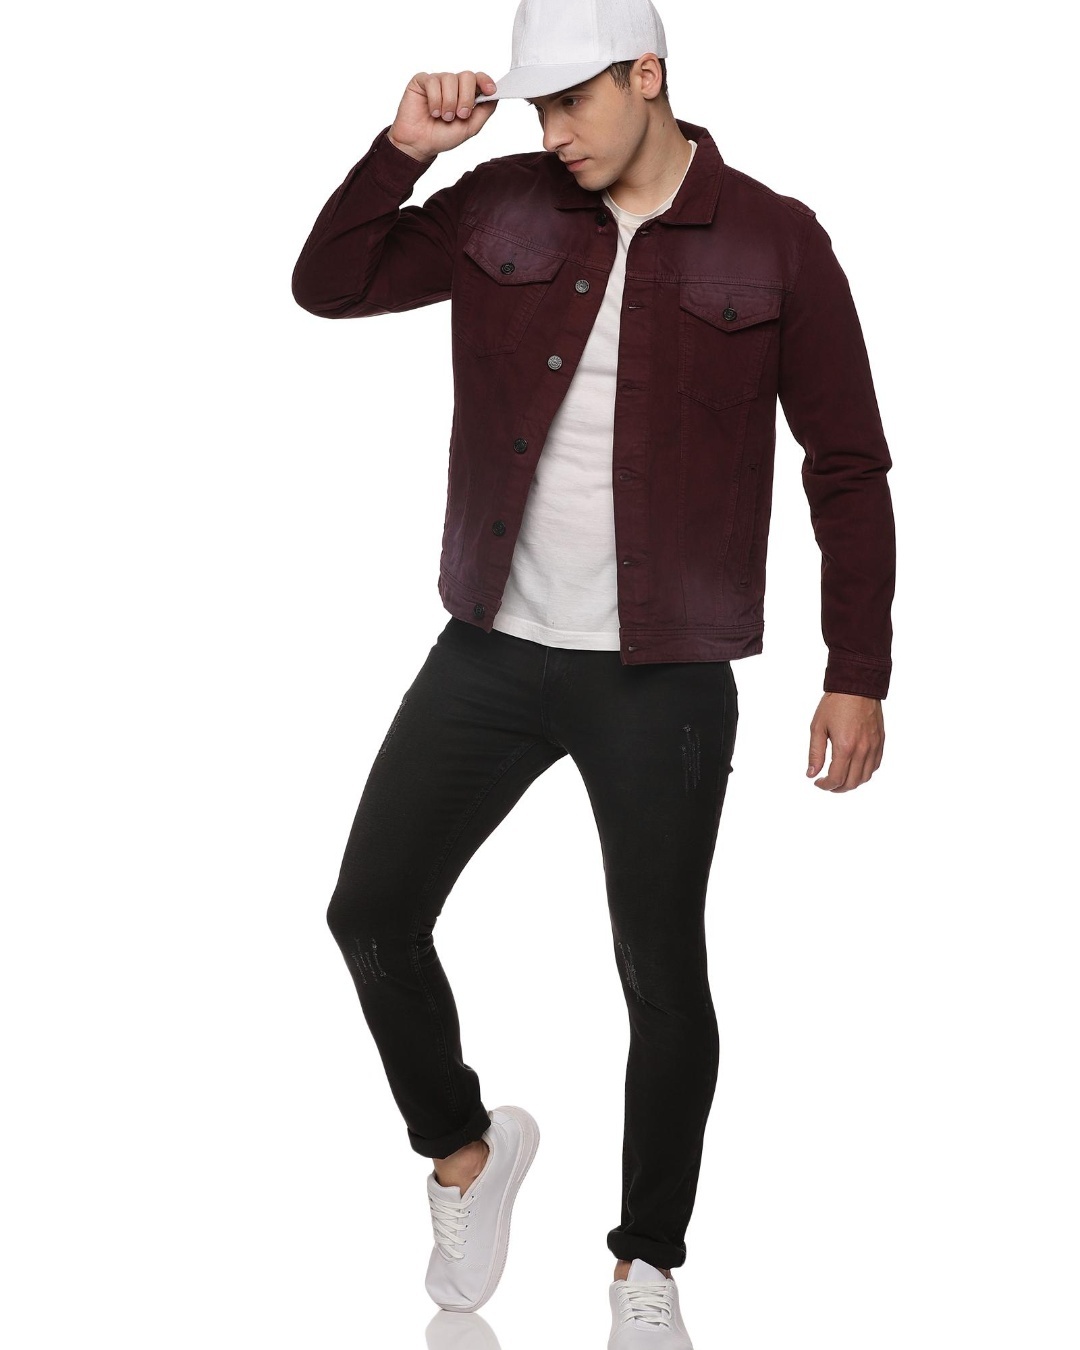 Burgundy Denim Jacket Casual Outfits For Men (9 ideas & outfits) | Lookastic